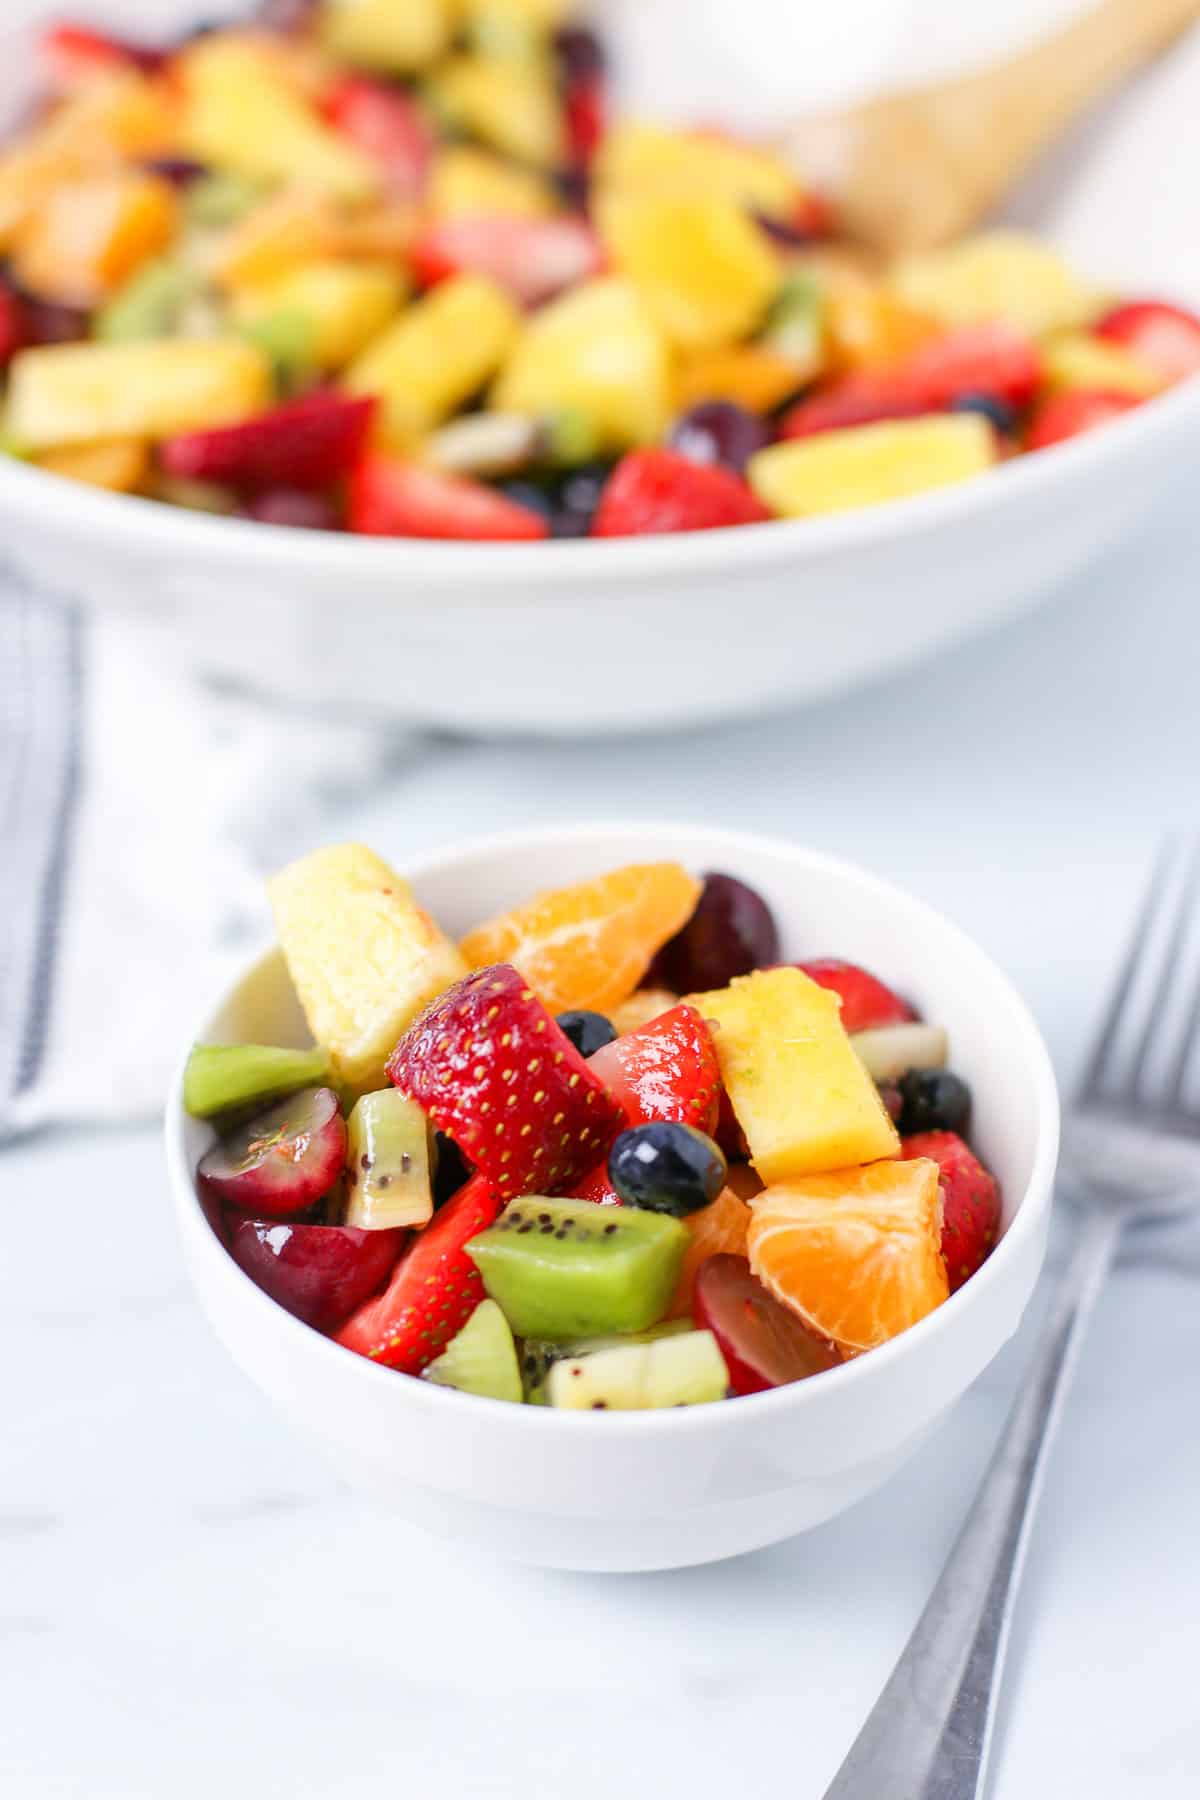 Fruit salad serving in a small white bowl with a fork next to it.